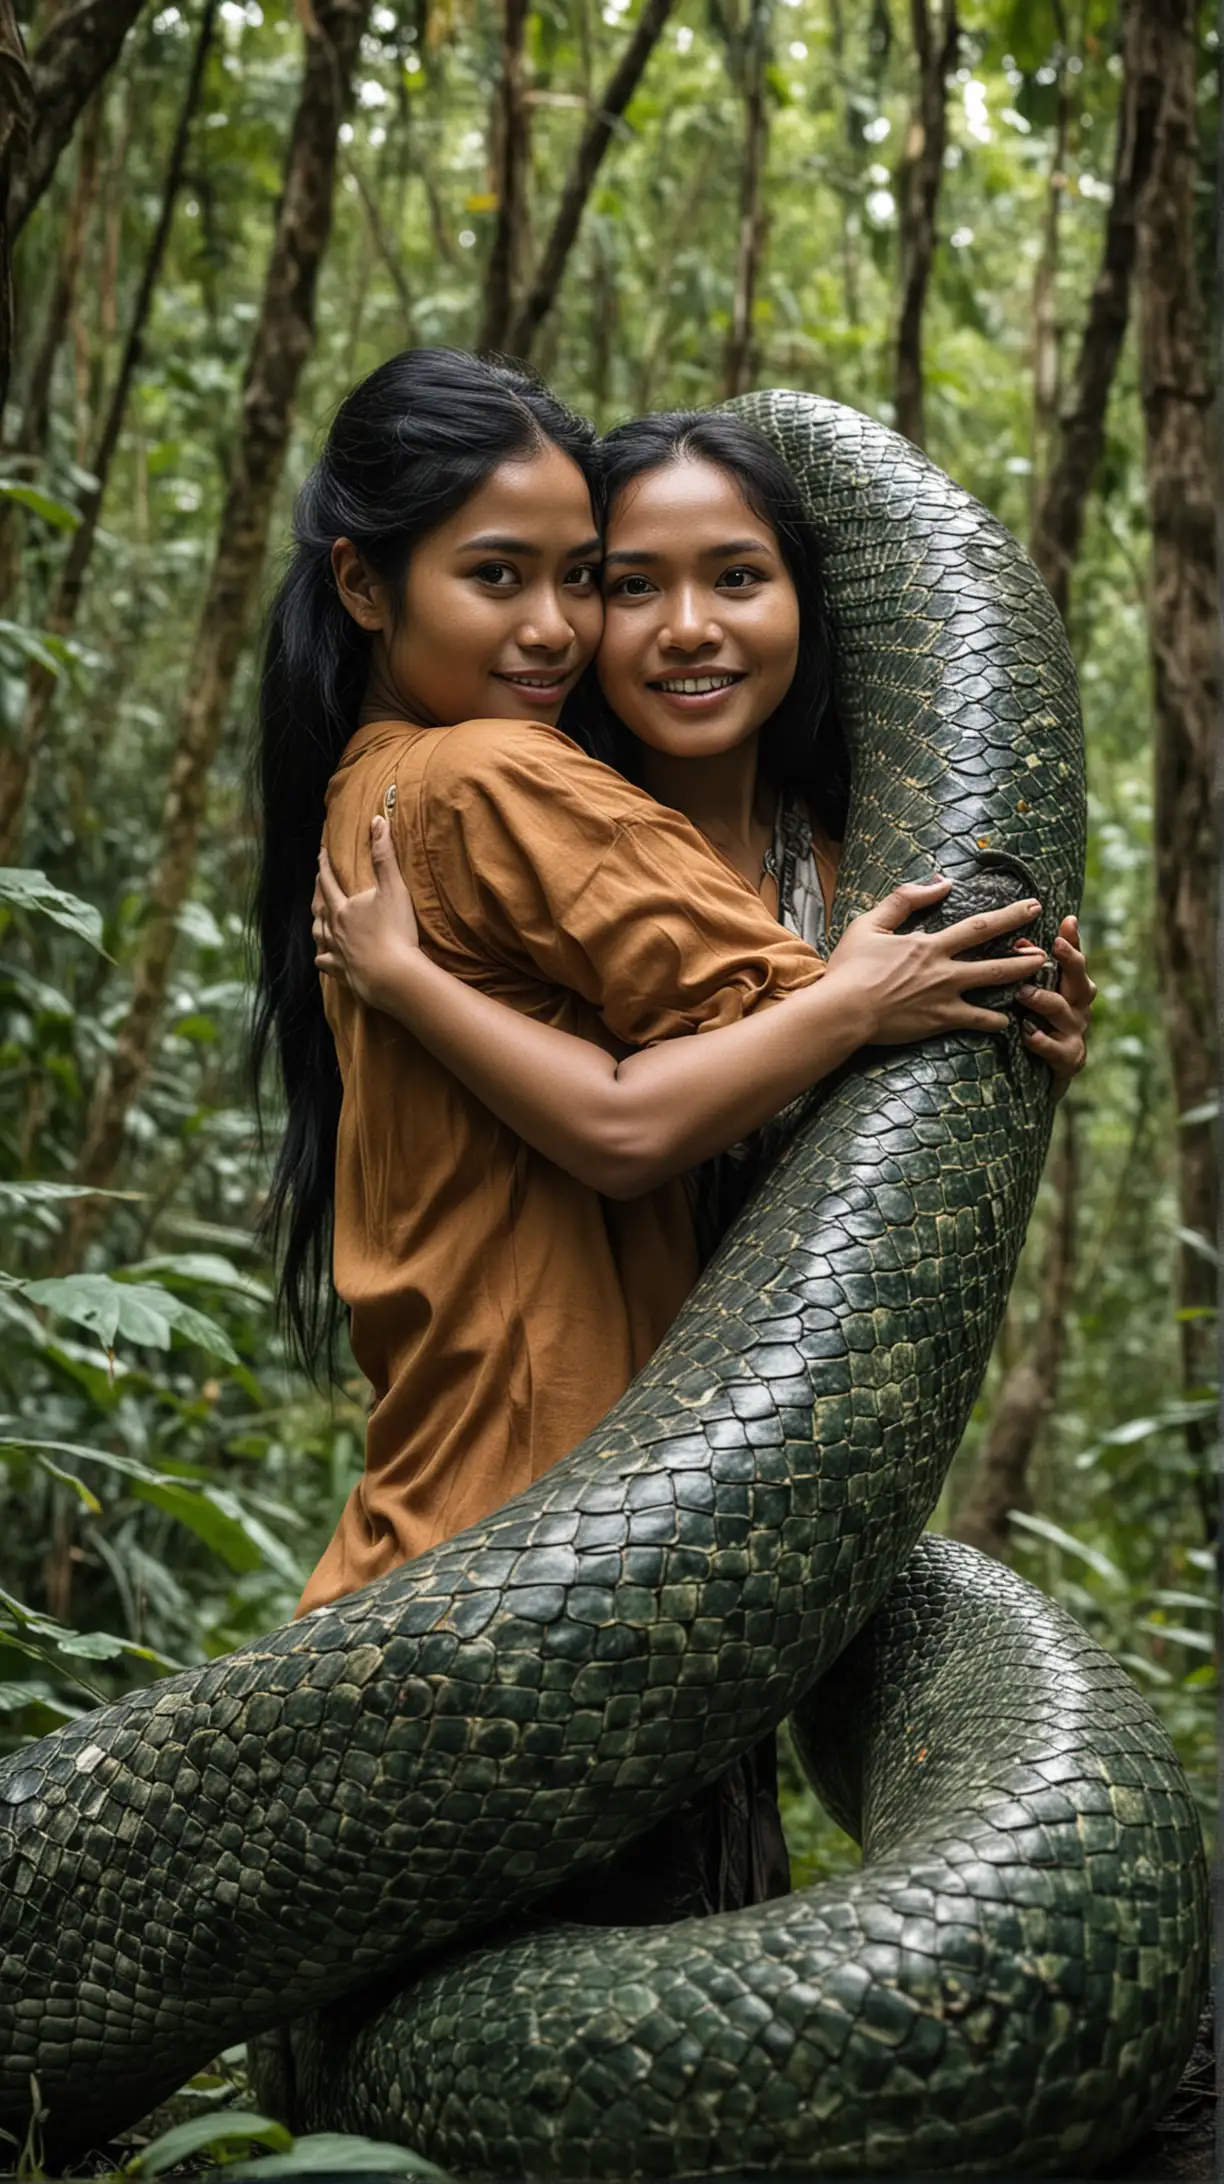 Indonesian woman hugging a giant snake in the forest